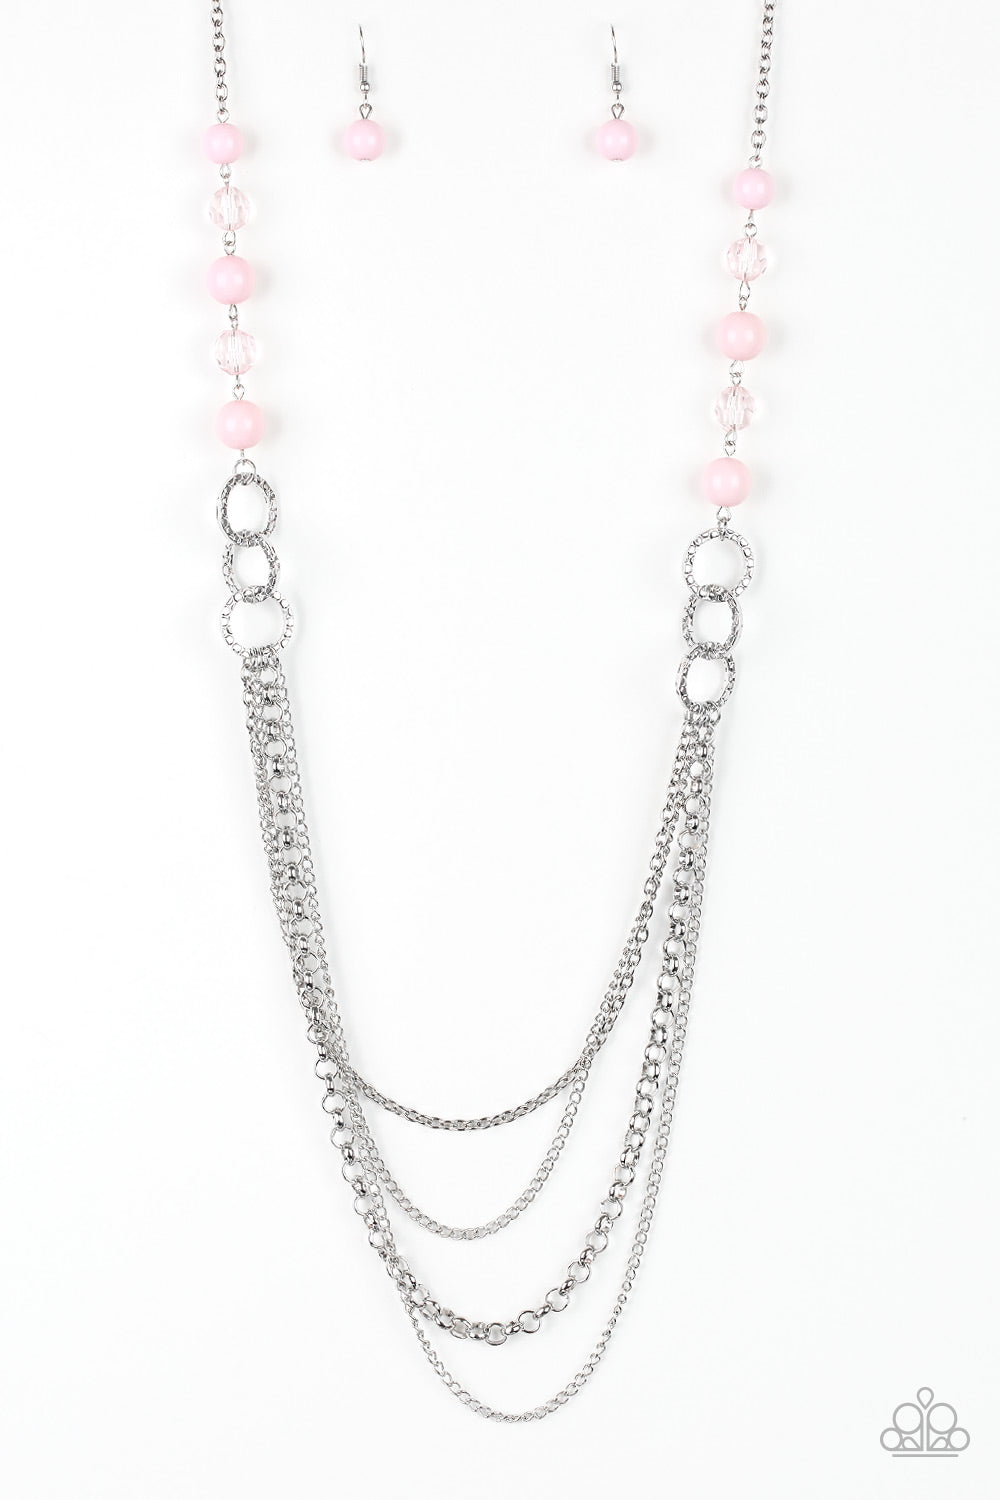 Vividly Vivid - Pink and Silver Necklace - Paprazzi Accessories - Polished pink, faceted crystal-like and delicately hammered silver hoops give way to mismatched silver chains down the chest for a whimsical look. Features an adjustable clasp closure. Sold as one individual necklace.